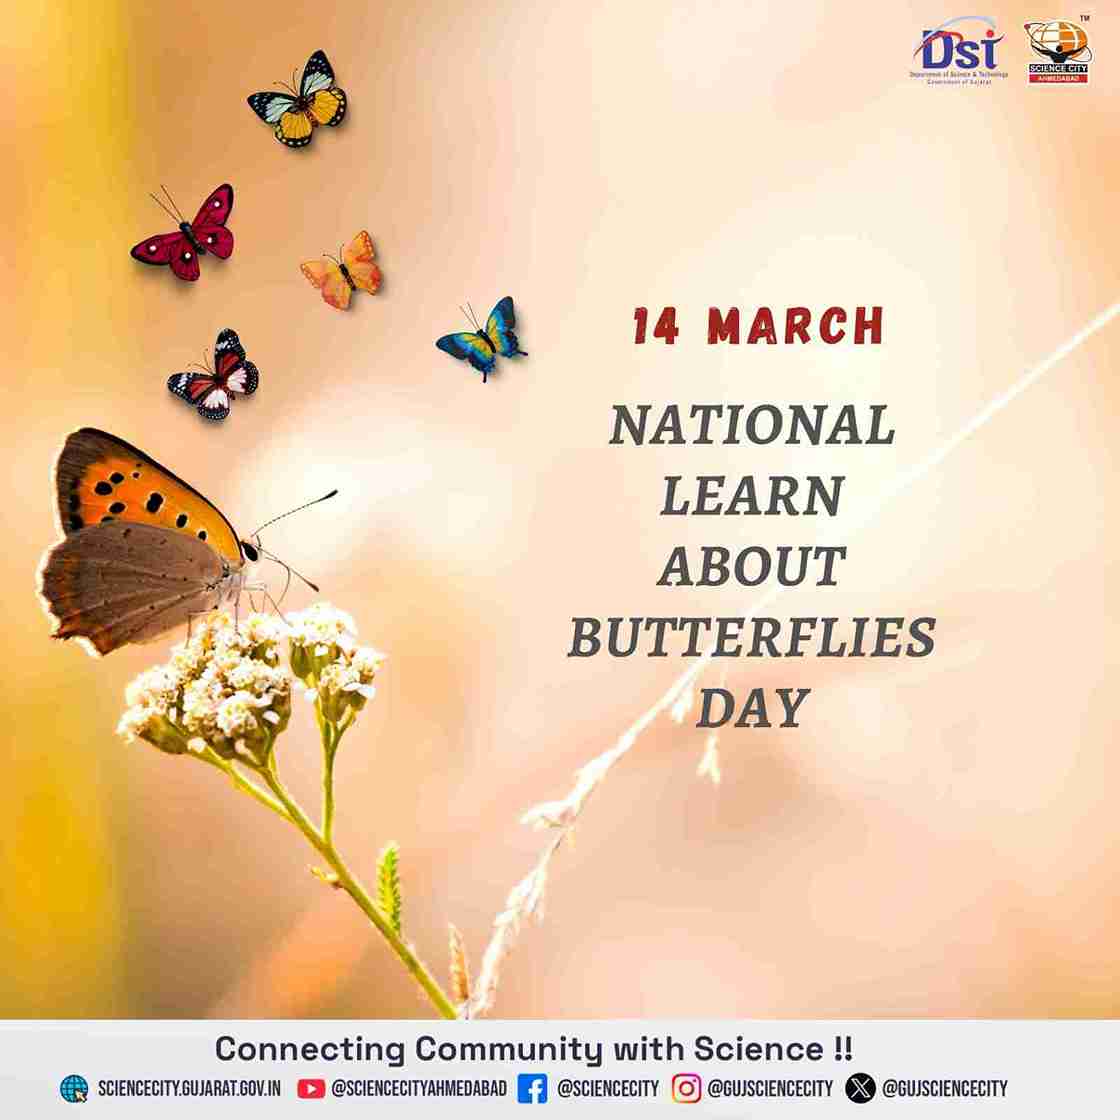 National Learn about Butterflies Day